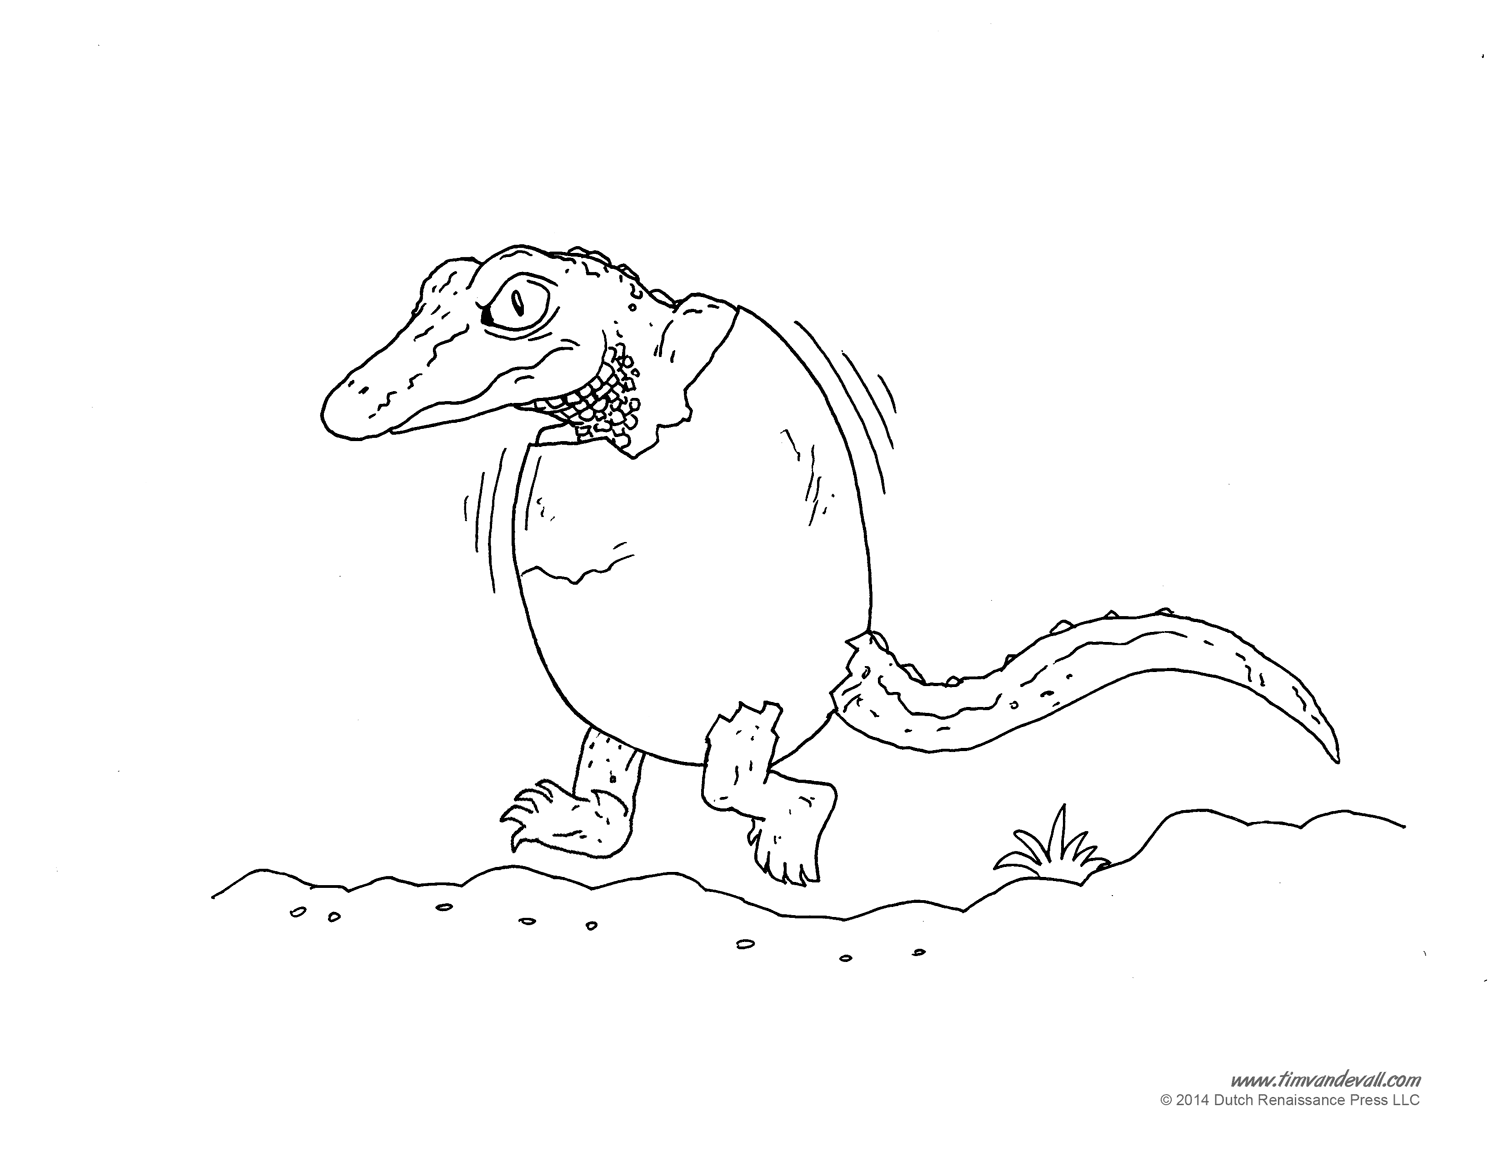 Alligator coloring pages â tims printables